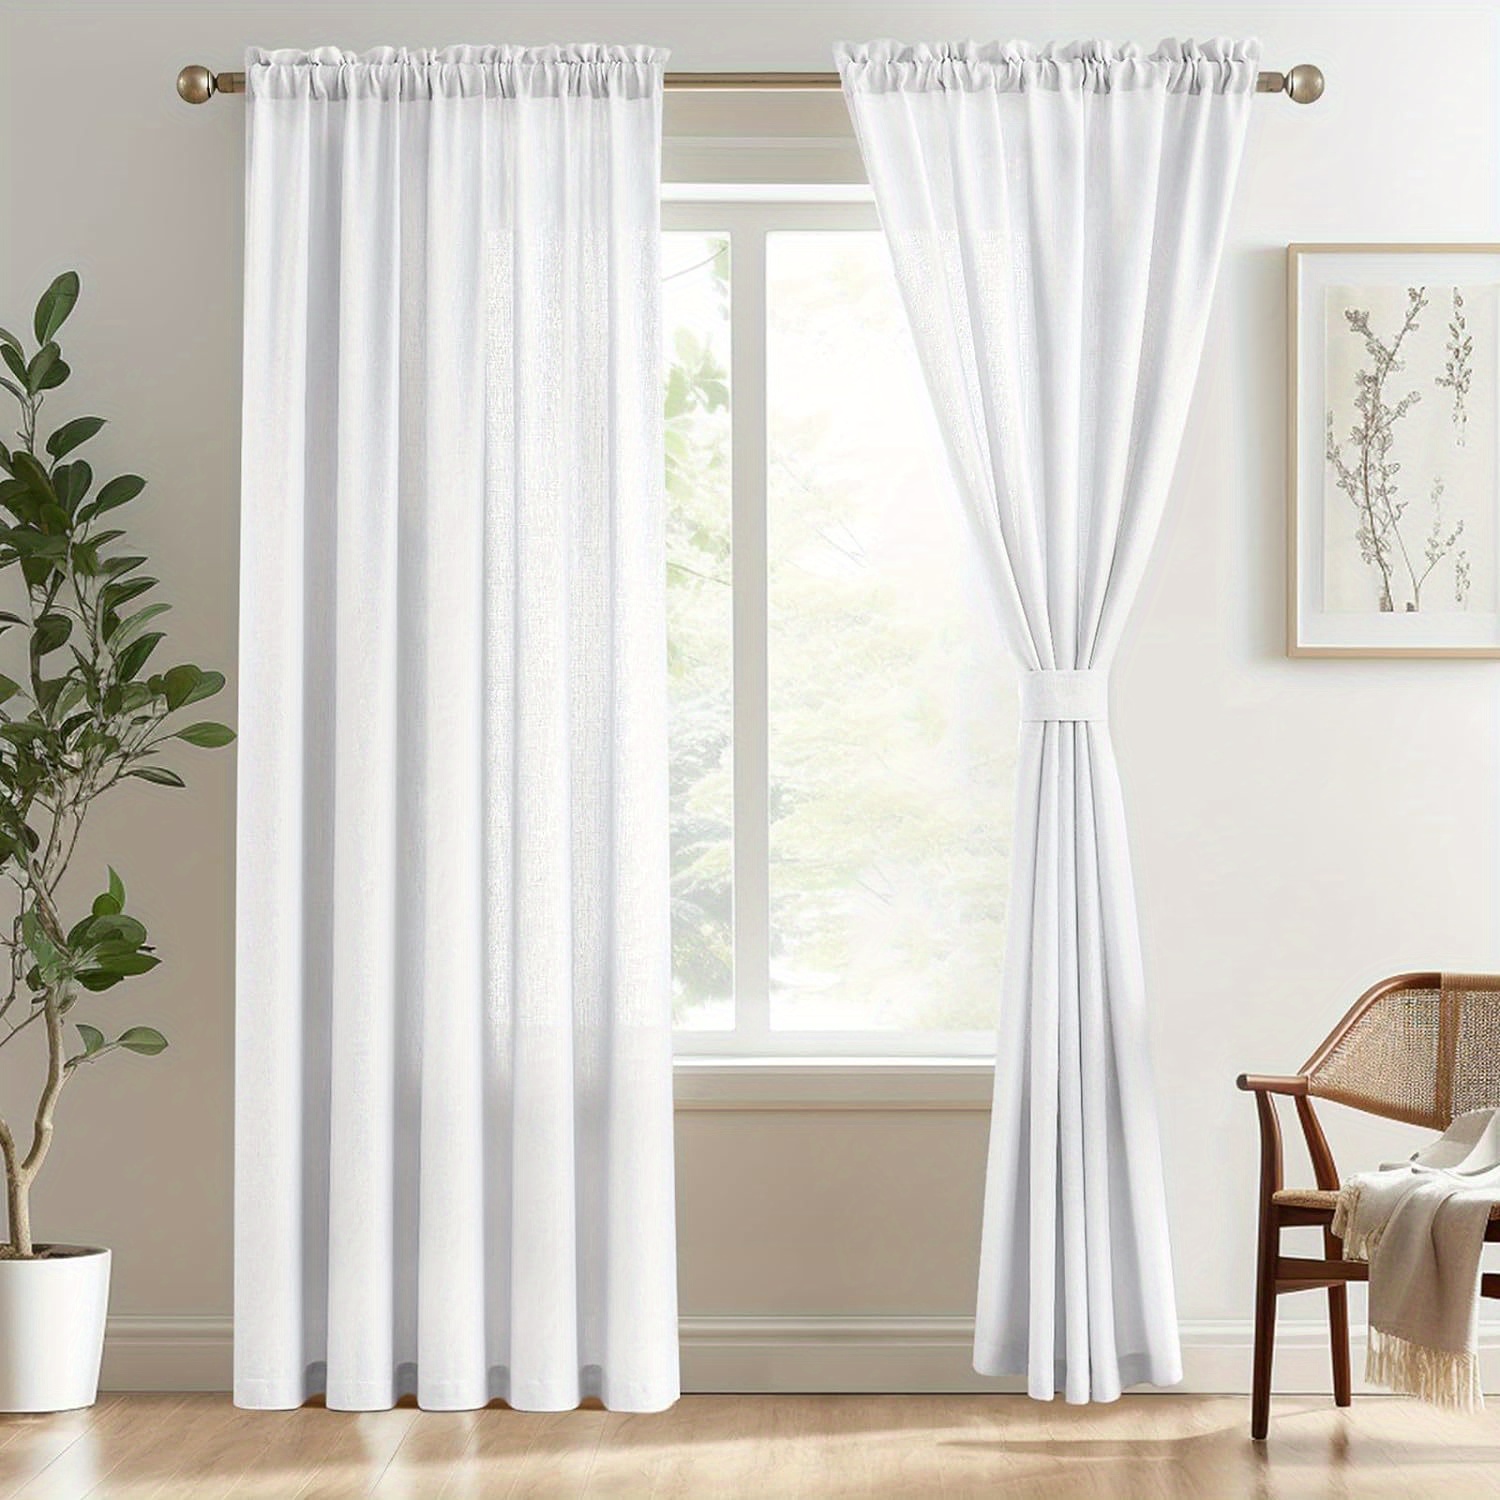 

2pcs White Semi Sheer Curtains Linen Look Rod Pocket Sheer Drapes Light Filtering Privacy Curtains For Bedroom Kitchen Small Windows